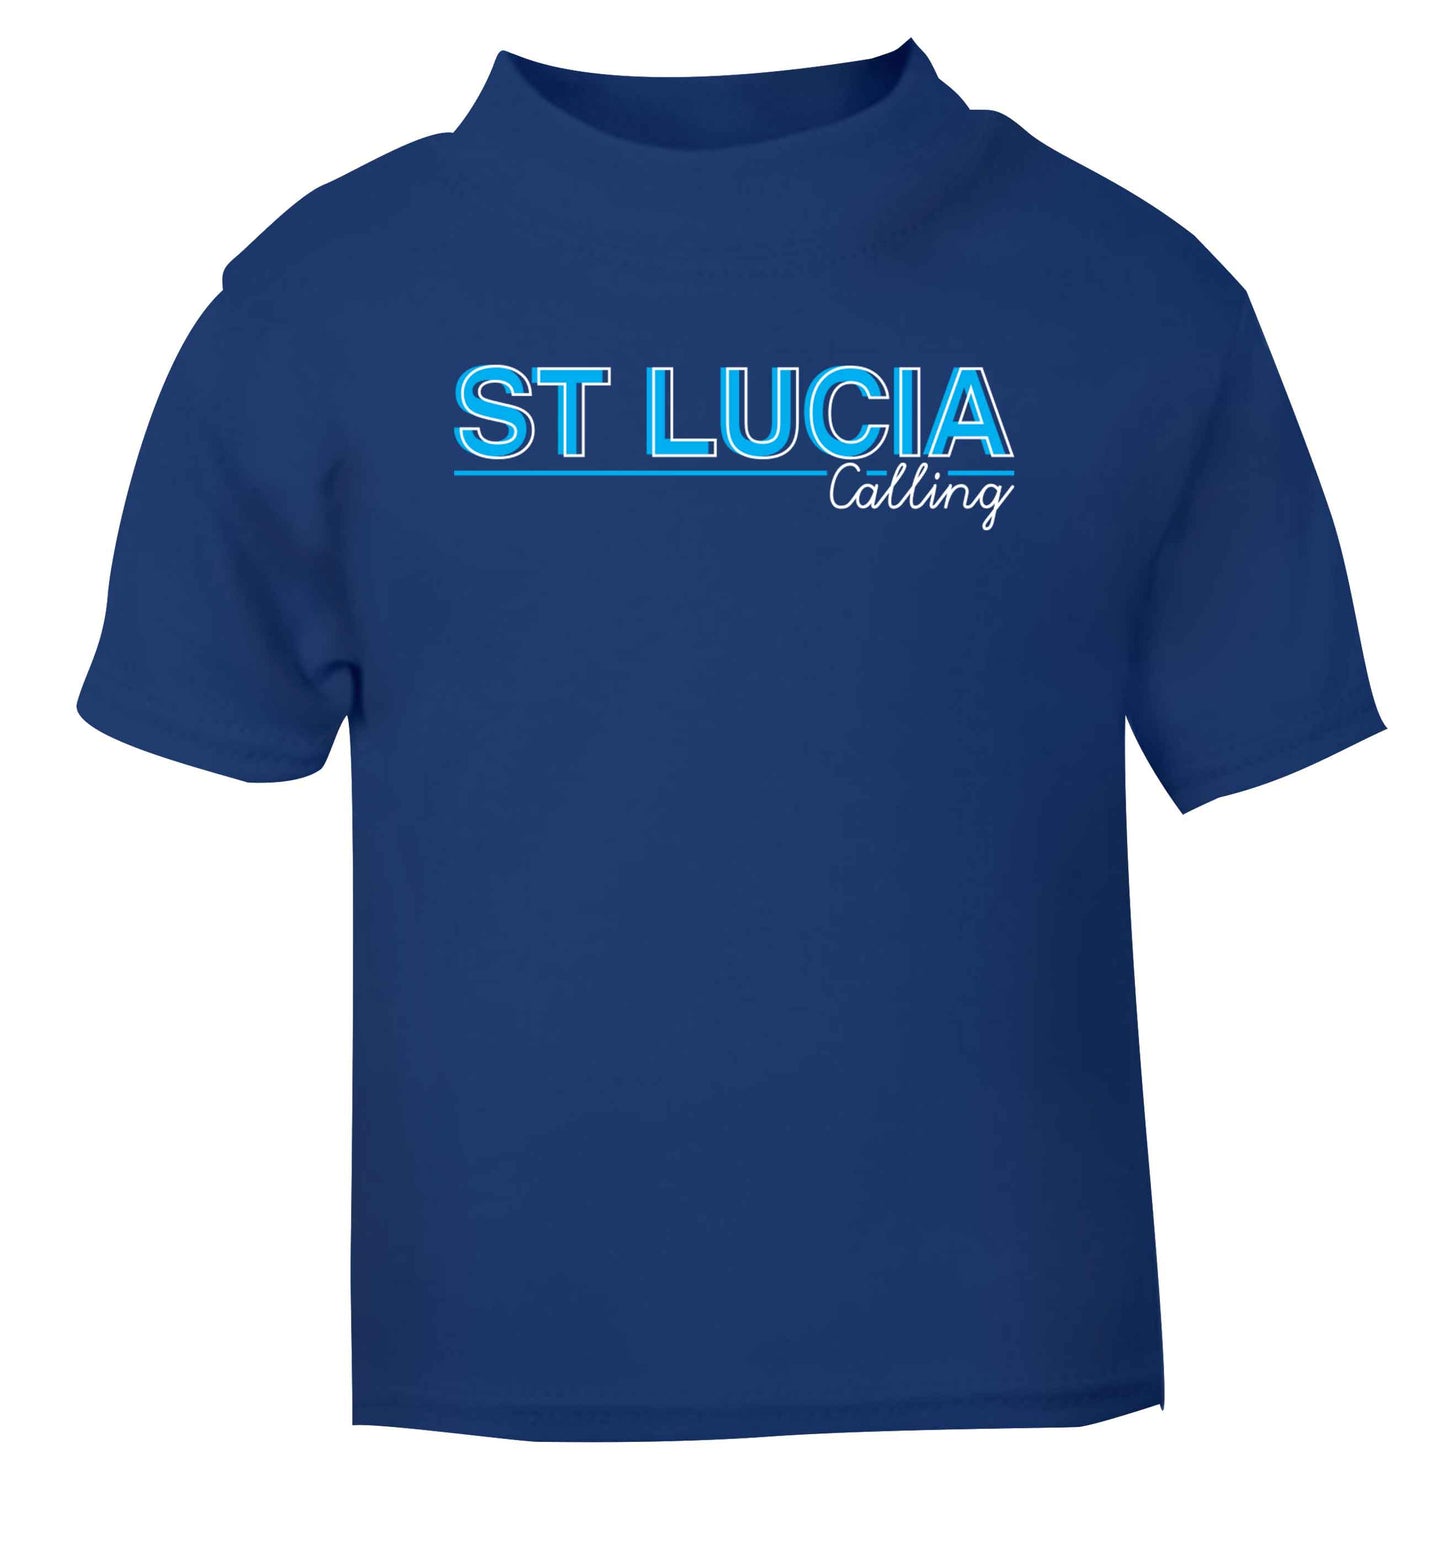 St Lucia calling blue Baby Toddler Tshirt 2 Years